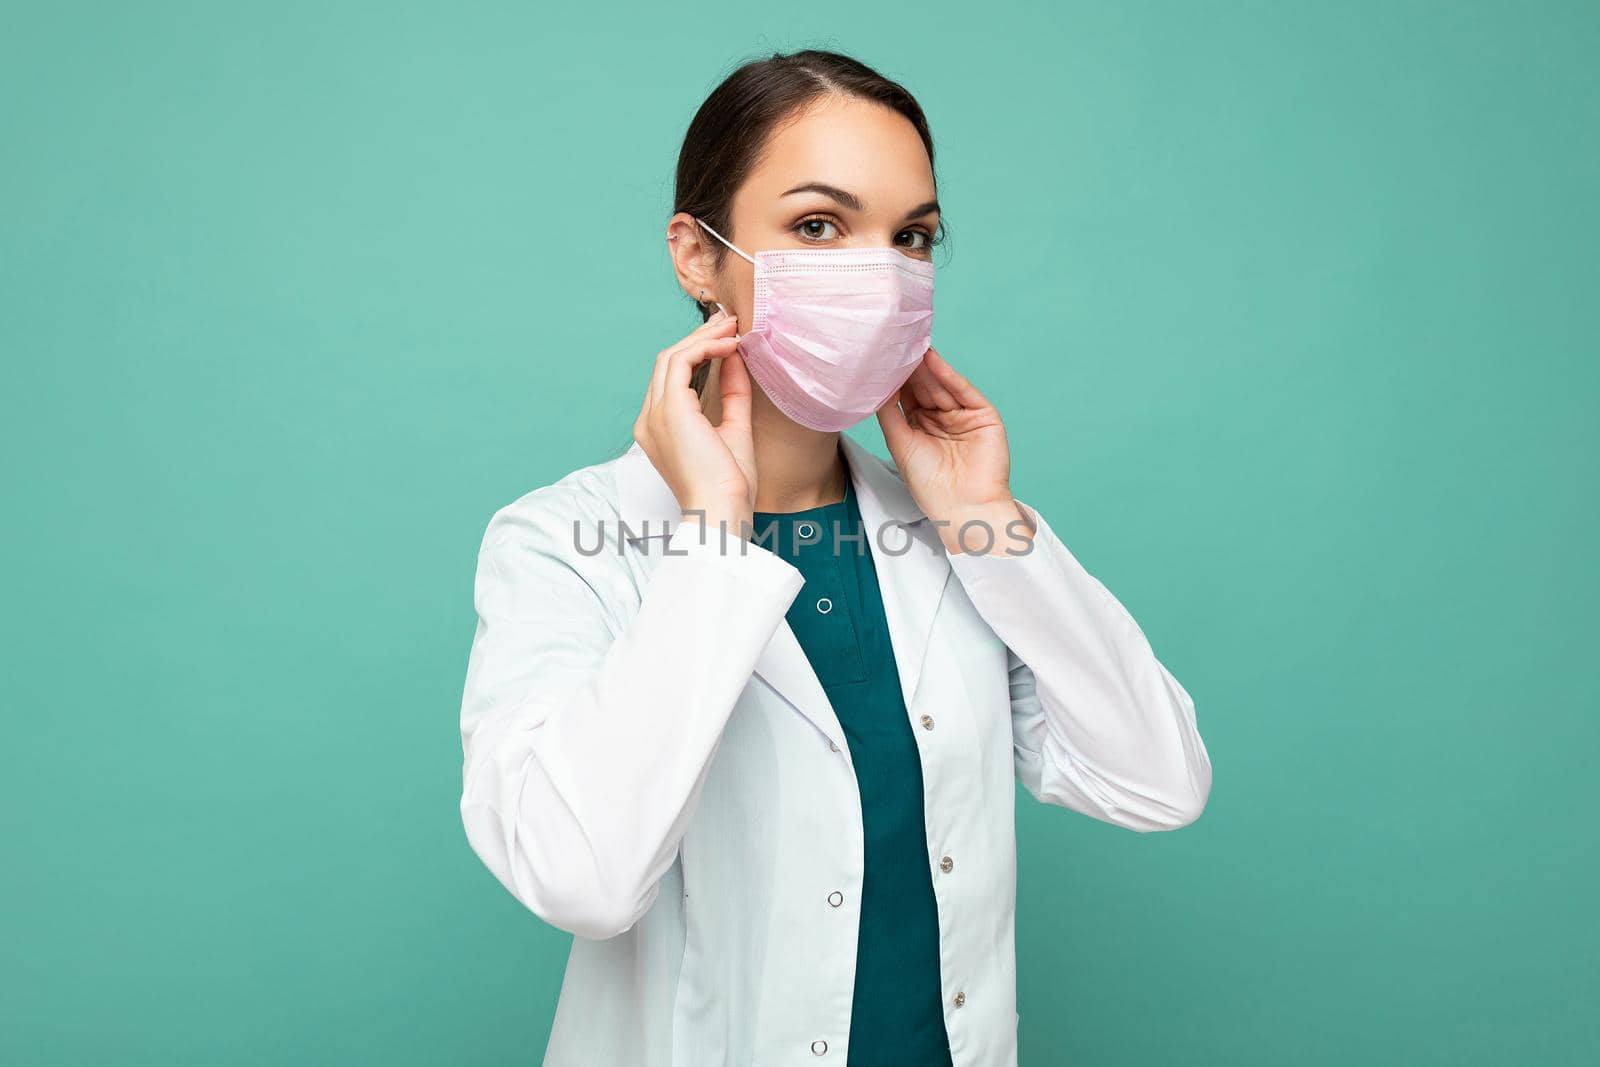 Beautiful young woman holds and wears a white medical mask to protect yourself from corona virus, cares for her health and safety, sticks to self-isolation. Concept of Covid-19.